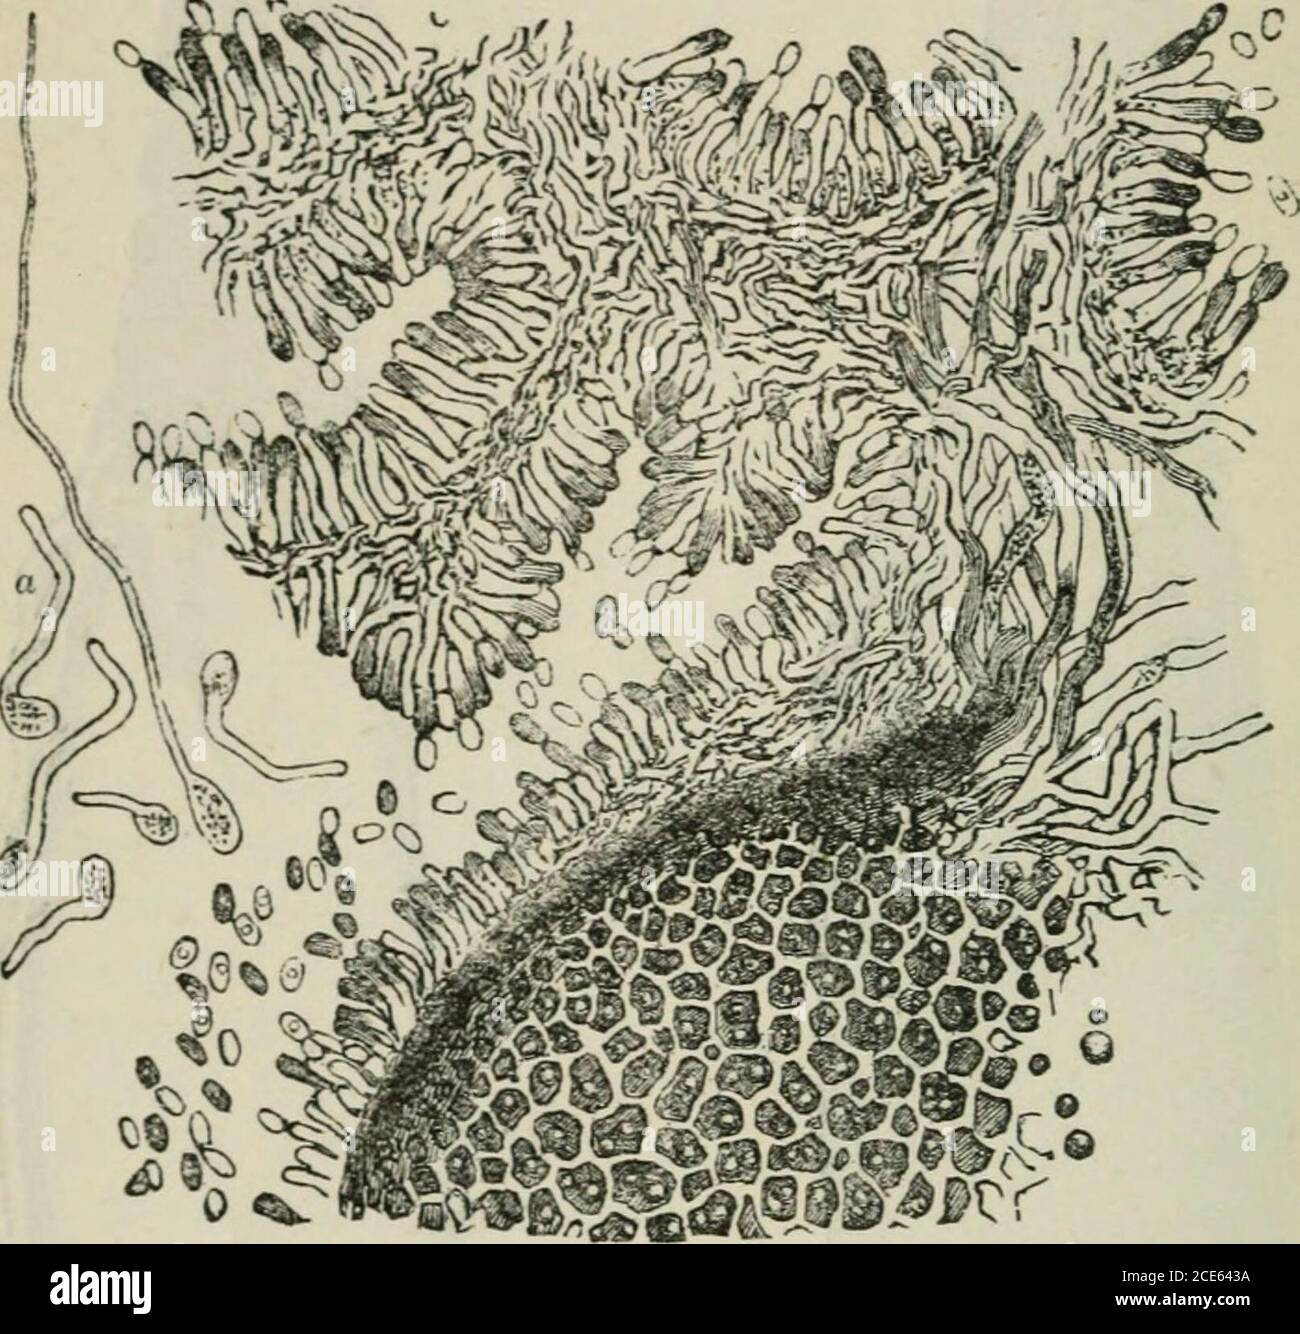 . Journal of botany, British and foreign . er in the foldings of the sphacelia (Fig. 6) are the freespaces where the nucleated cells or spores are produced. The illustration (Fig. 7), copied from Tulasne, shows the relationof the different structures. The dark lower portions of the woodcutis a section through the growing sclerotium, or ergot properly socalled. This is composed, as we have already seen, of densely-packed polygonal cells, filled with oil globules. On its outer surfaceand from its apex aie given off elongated cells, which are the sup- c 2 20 ON ERGOT. ports (sterigmata) of oblong Stock Photo